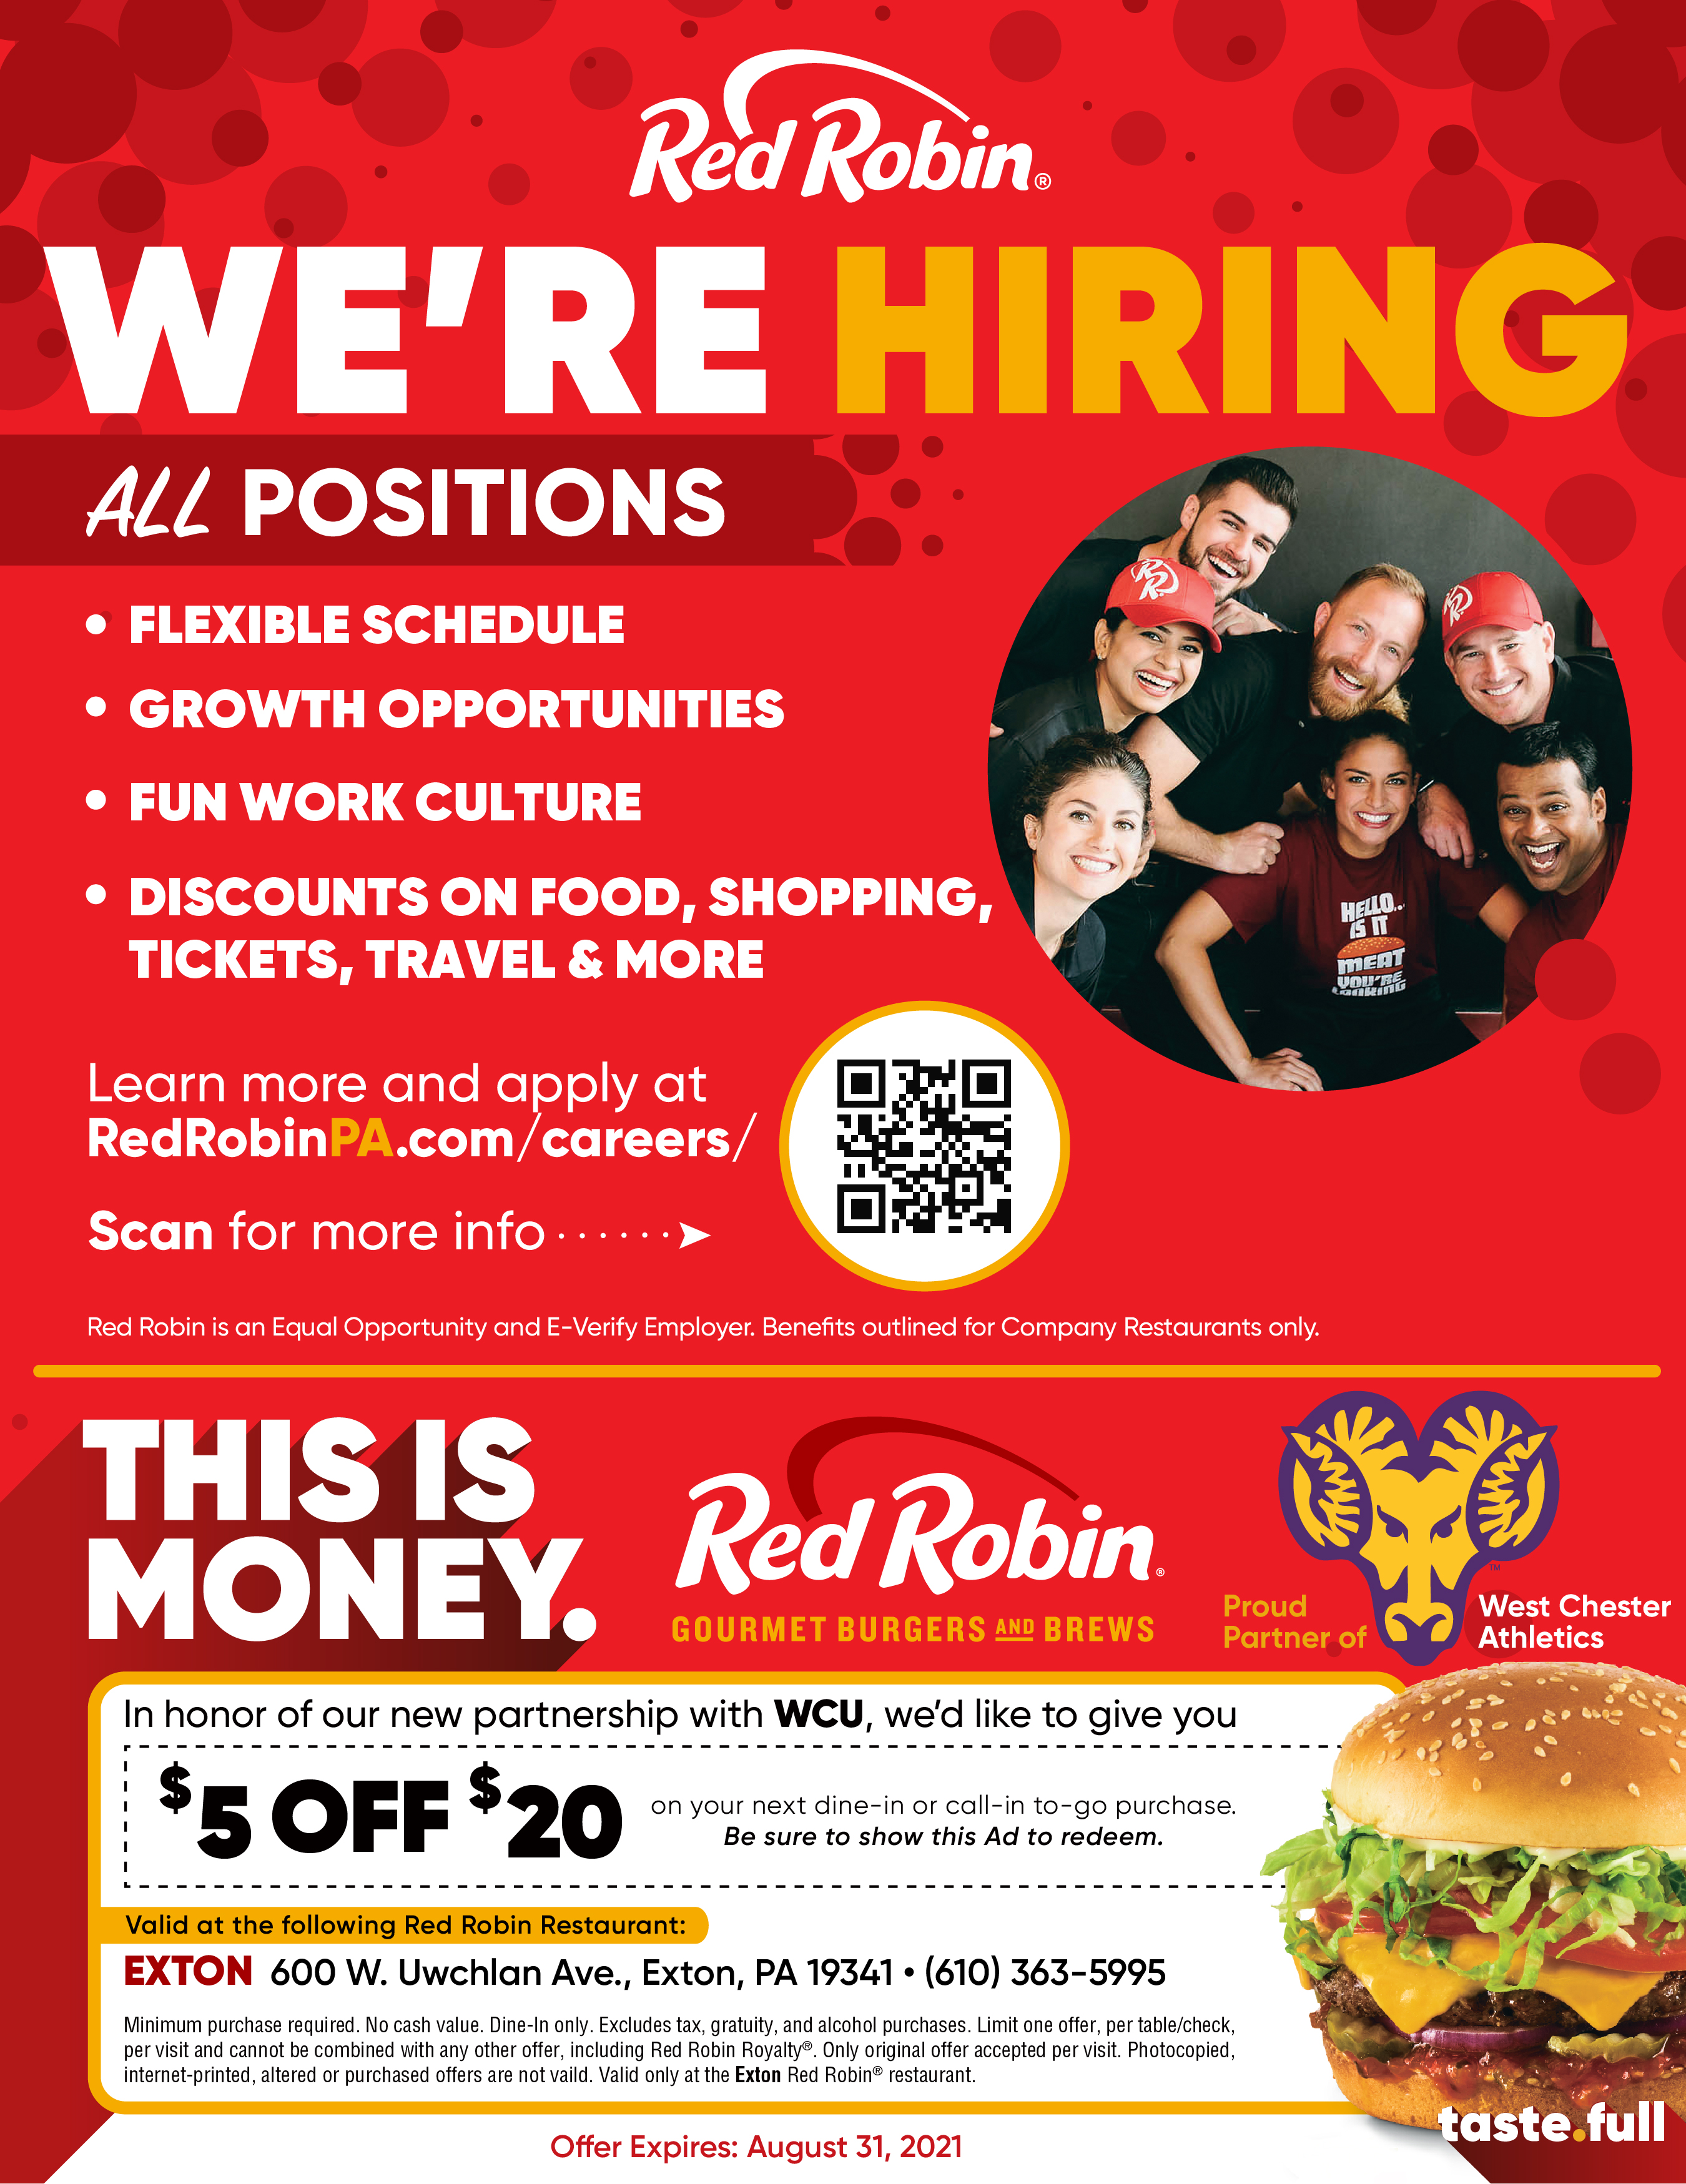 Red Robin in Exton, PA is hiring, all positions. And a special $5 off $20 offer, in honor of our new partnership with West Chester University Athletics.